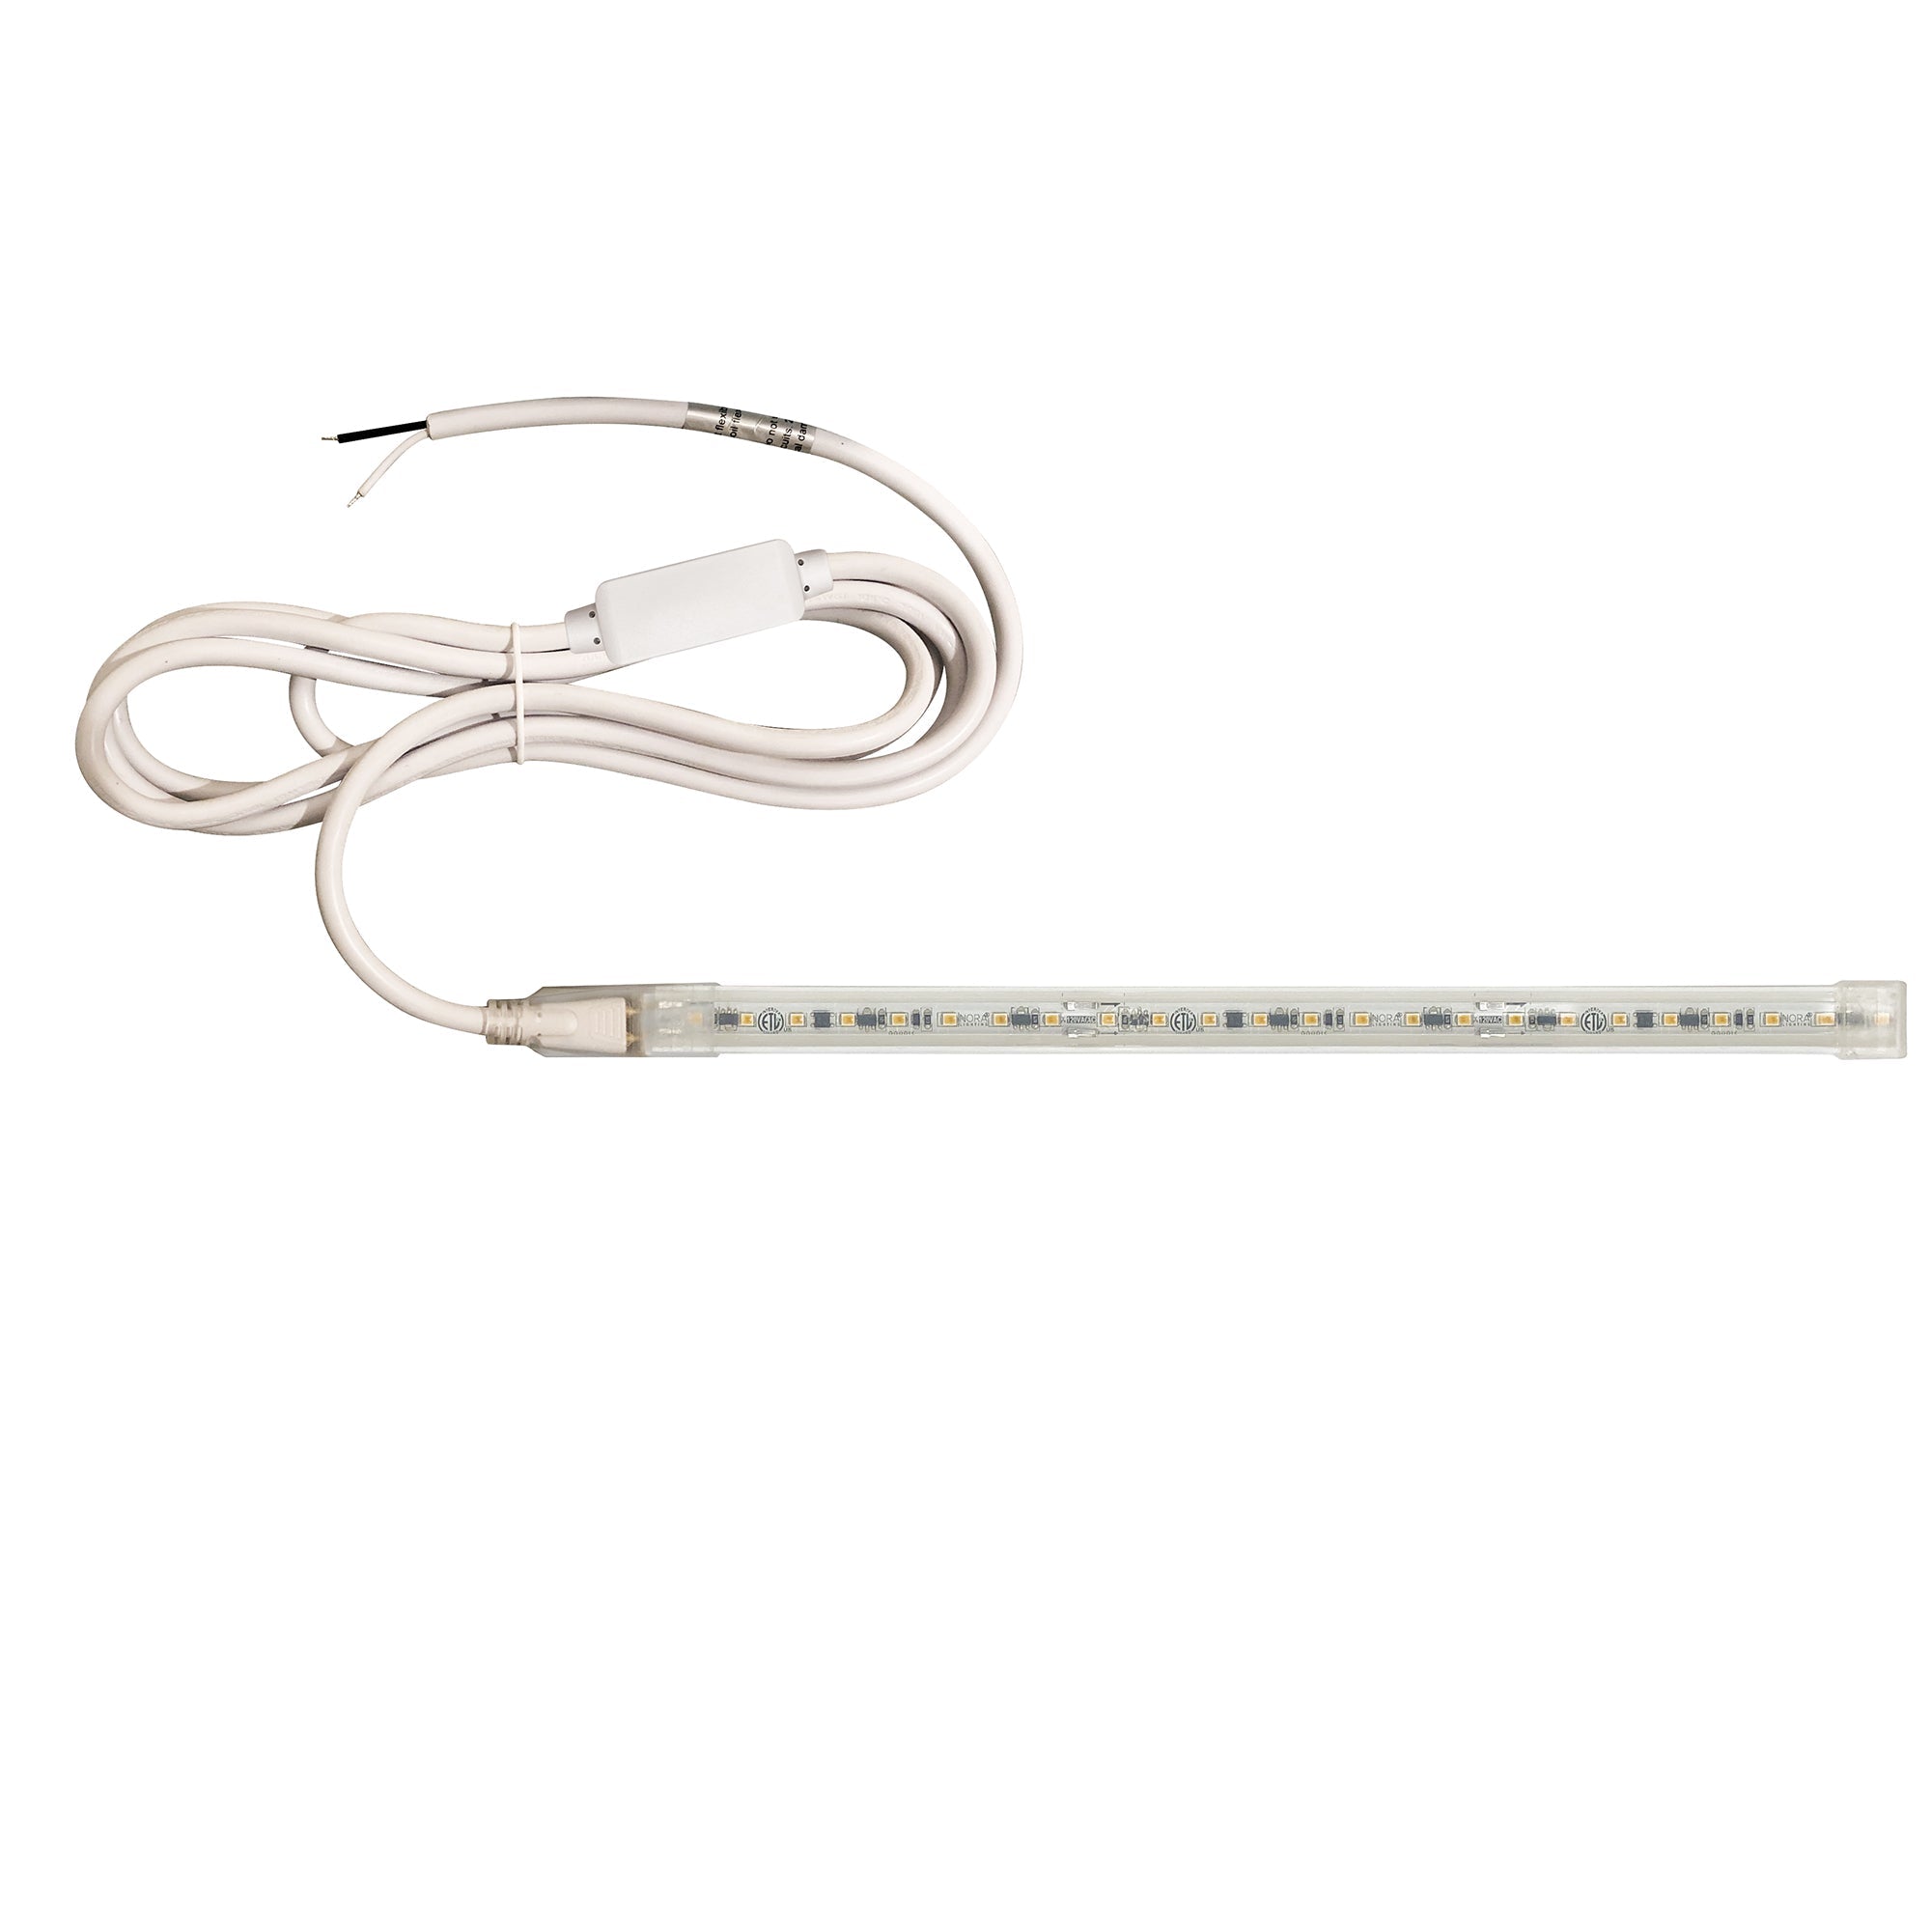 Nora Lighting NUTP13-W10-12-930/HWSP - Accent / Undercabinet - Custom Cut 10-ft 120V Continuous LED Tape Light, 330lm / 3.6W per foot, 3000K, w/ Mounting Clips and 8' Hardwired Power Cord w/ Surge Protector